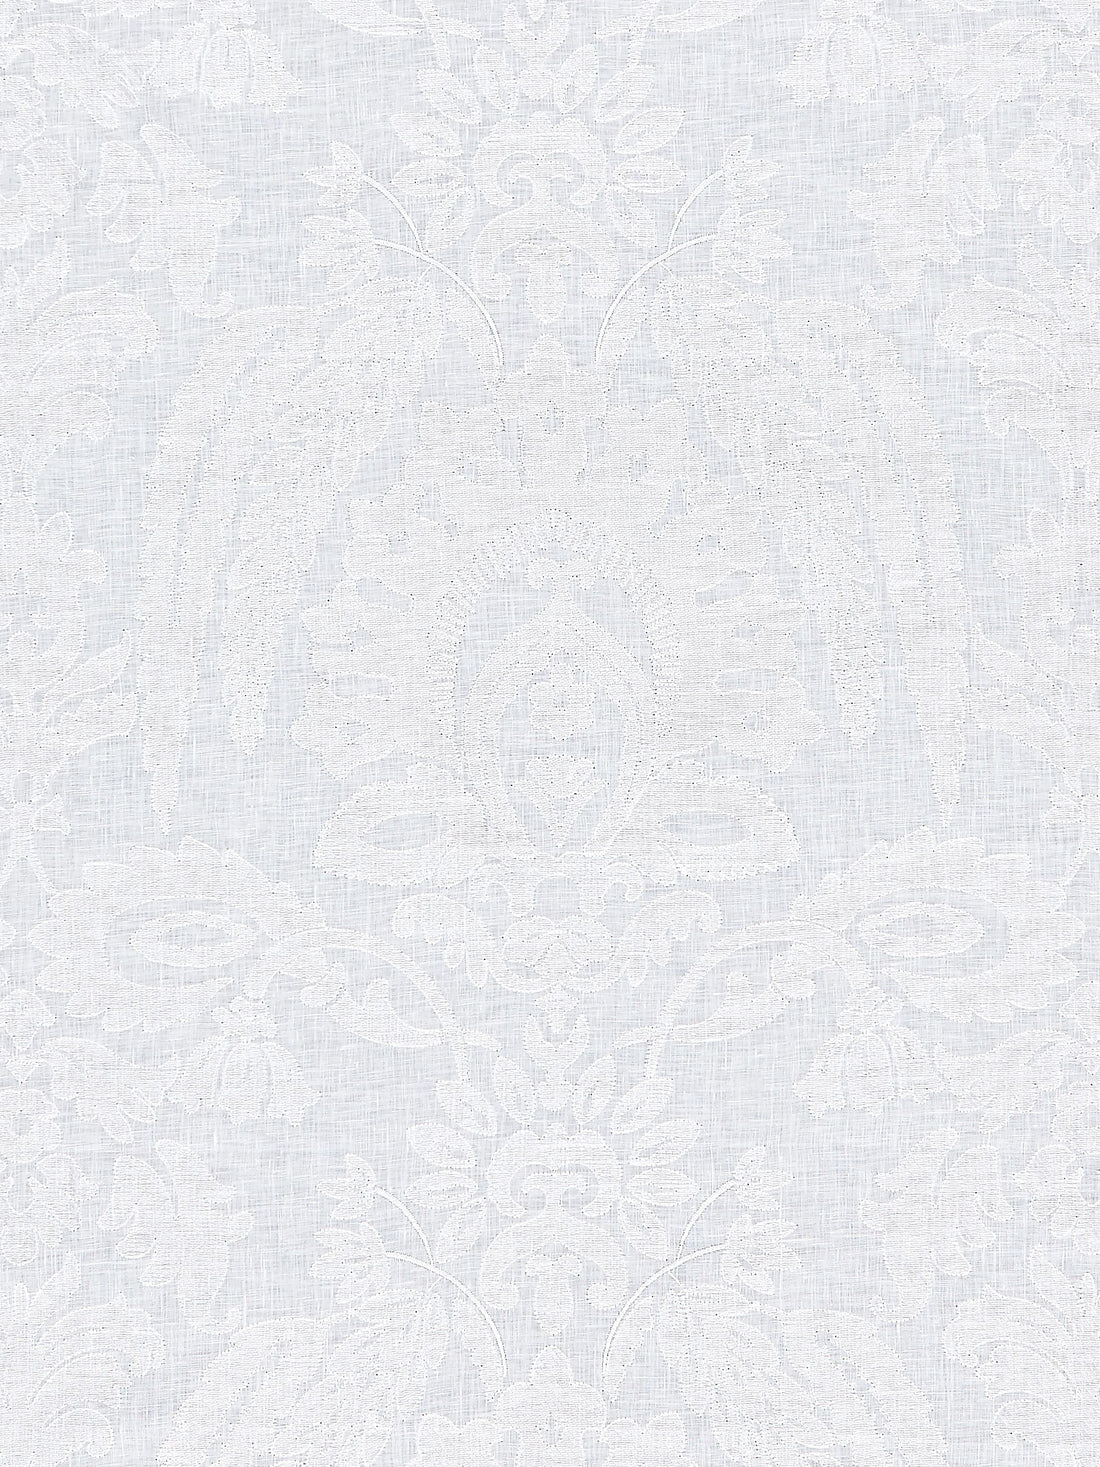 Lia Damask Sheer fabric in snow color - pattern number SC 000127053 - by Scalamandre in the Scalamandre Fabrics Book 1 collection